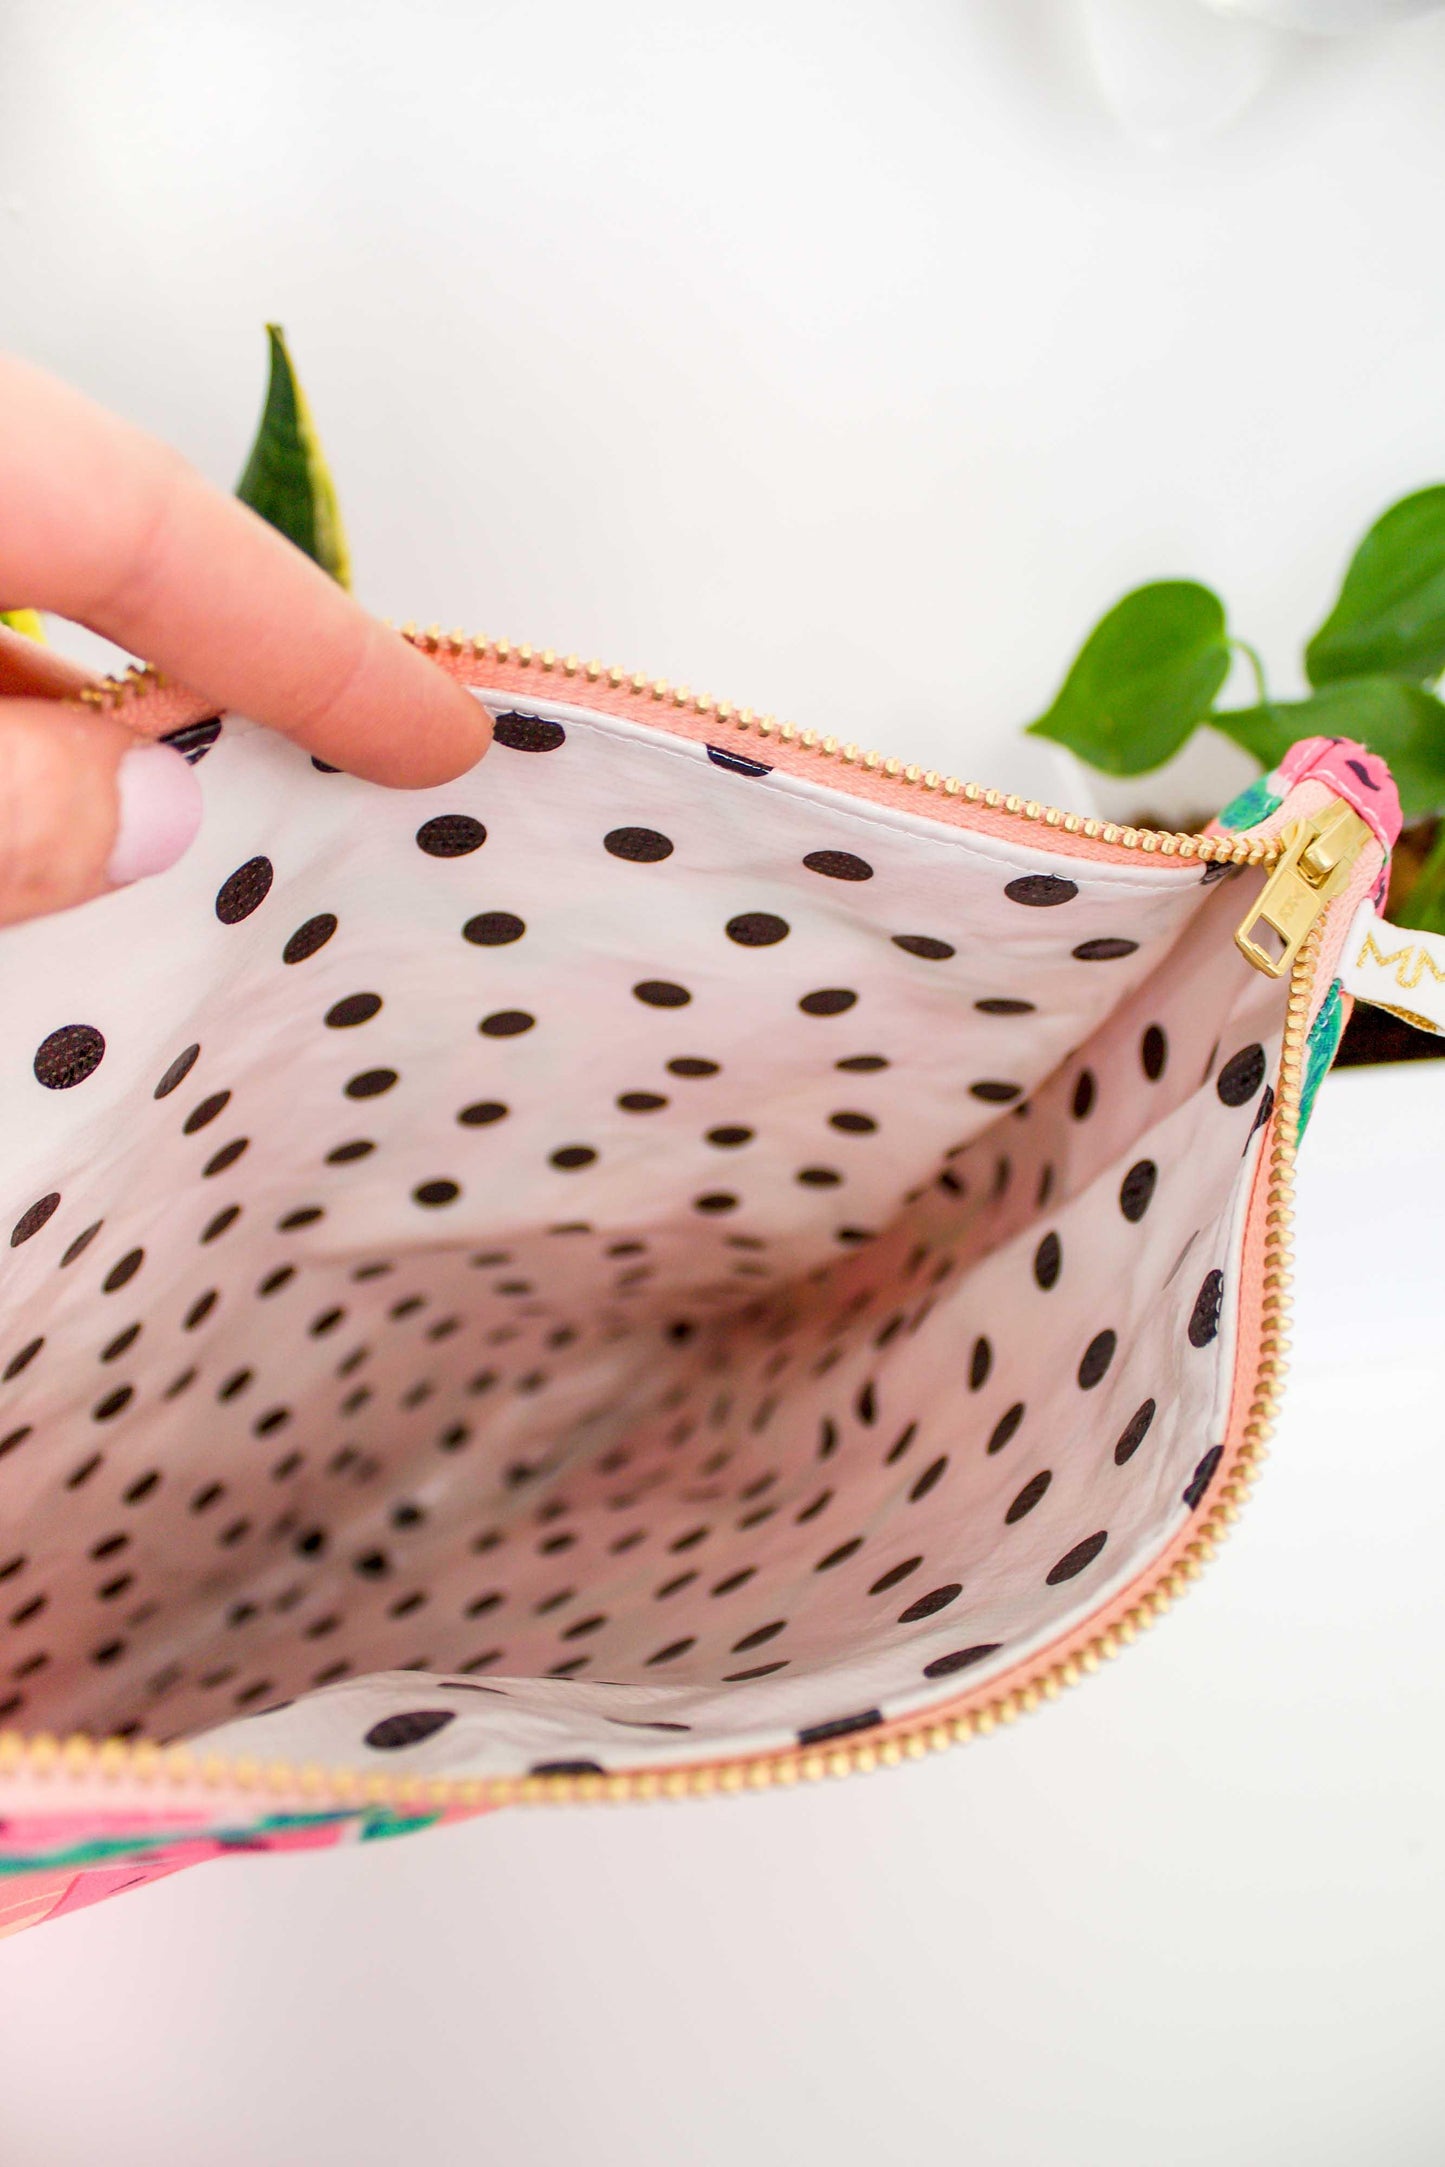 Watermelon Large Wet Bag READY TO SHIP - Modern Makerie